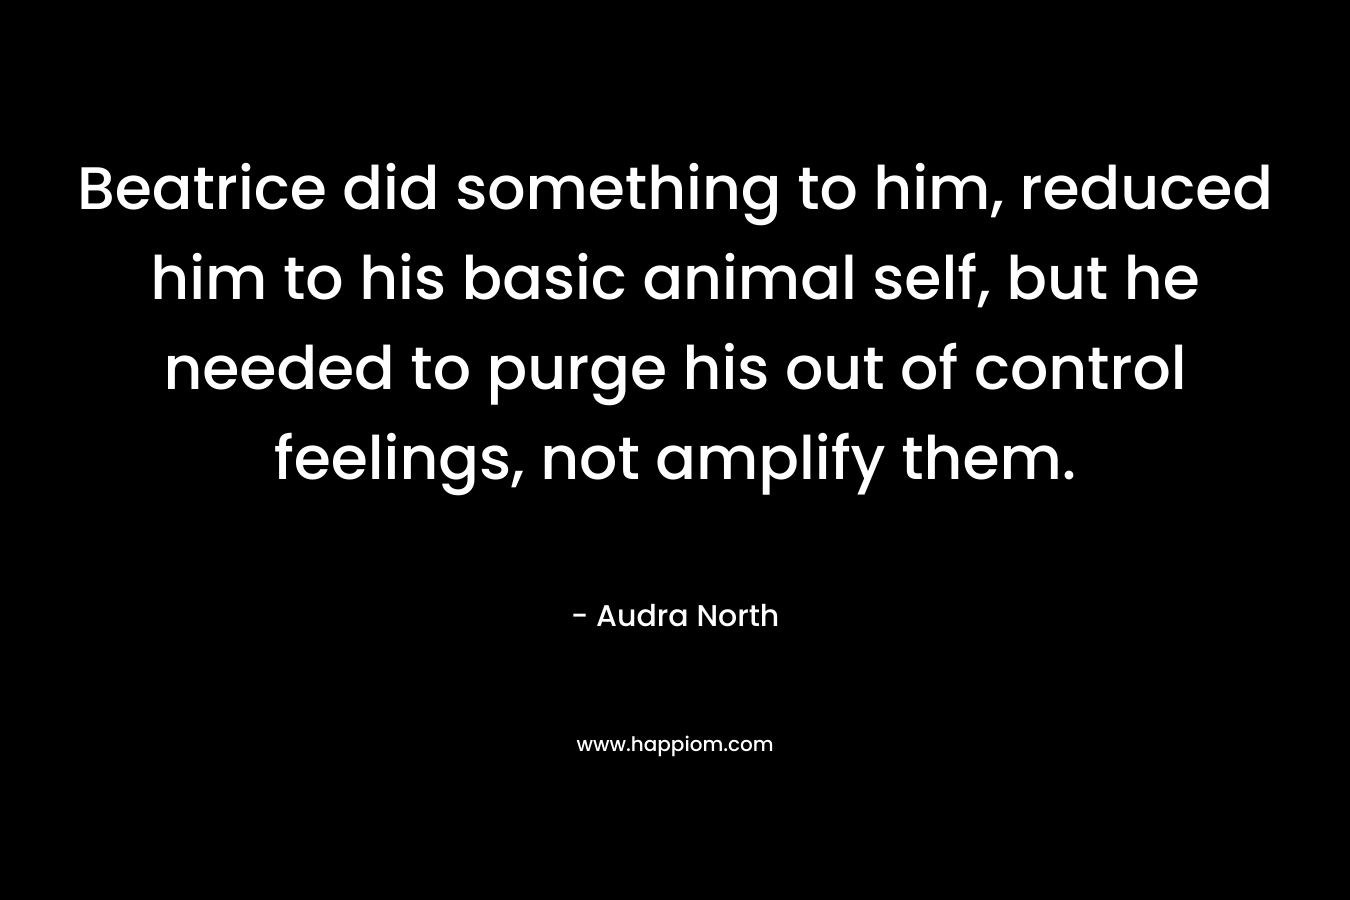 Beatrice did something to him, reduced him to his basic animal self, but he needed to purge his out of control feelings, not amplify them. – Audra North